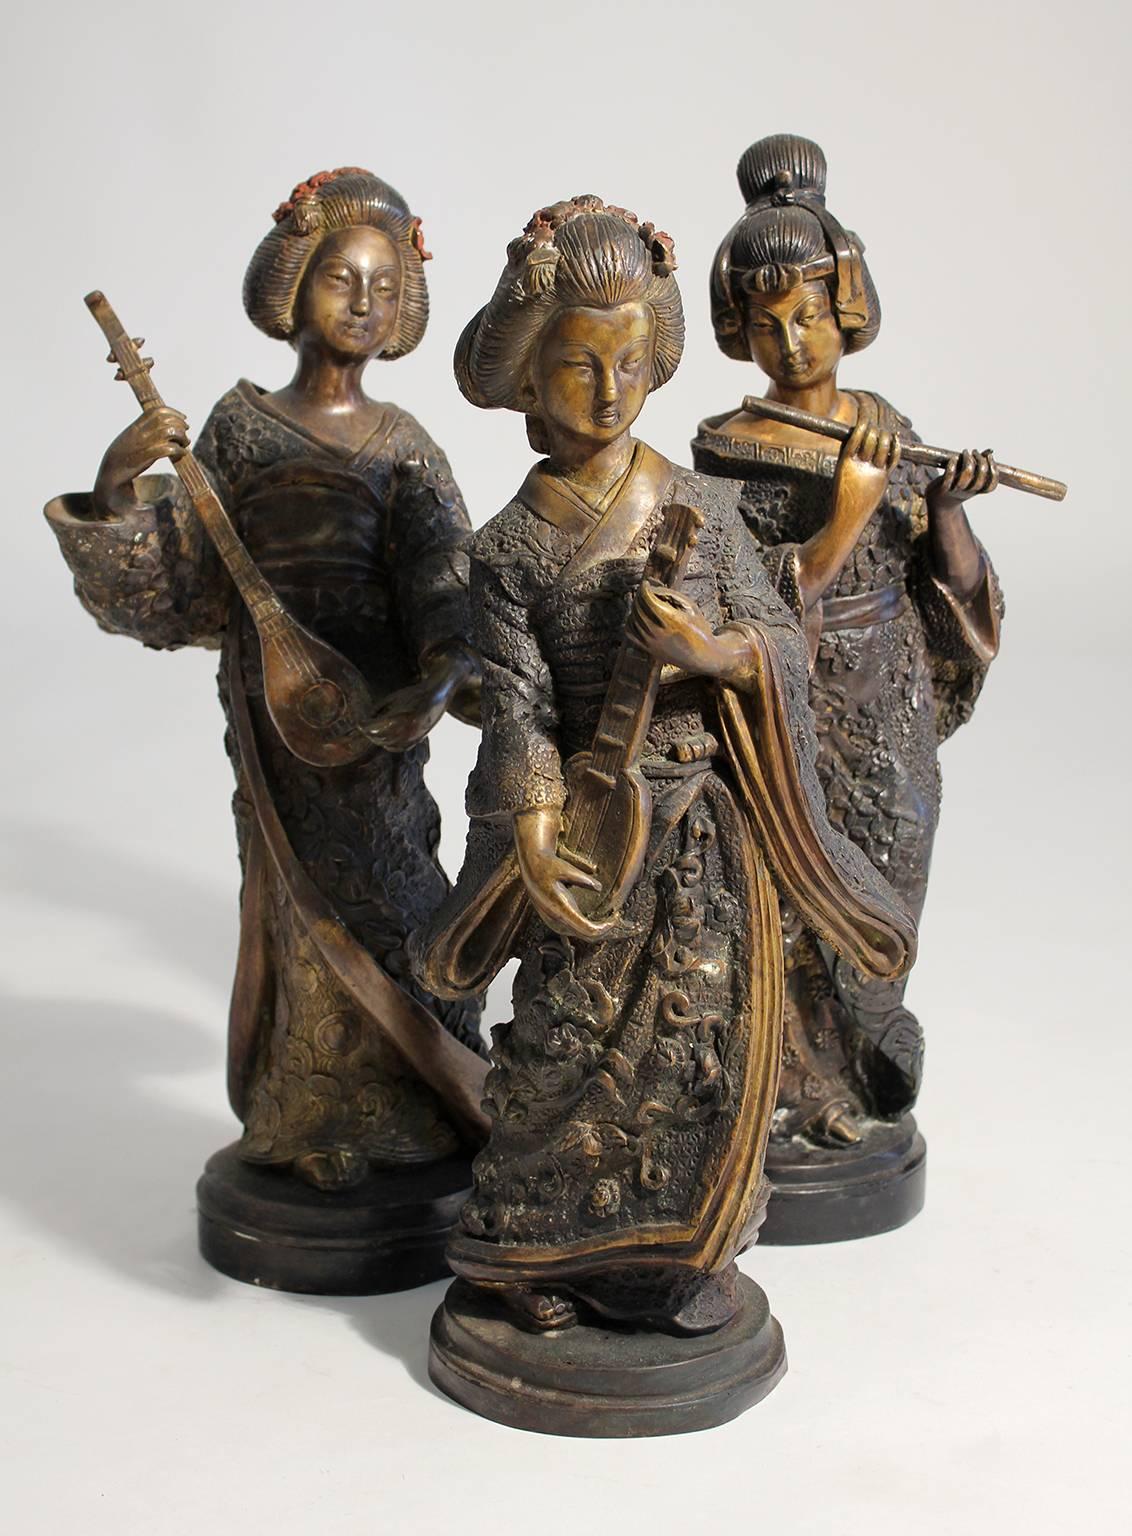 Beautiful set of three Japanese cast bronze and cold paint art sculptures. Great detail and wonderful patina. In excellent shape and display well. 
#1 measures 18.5